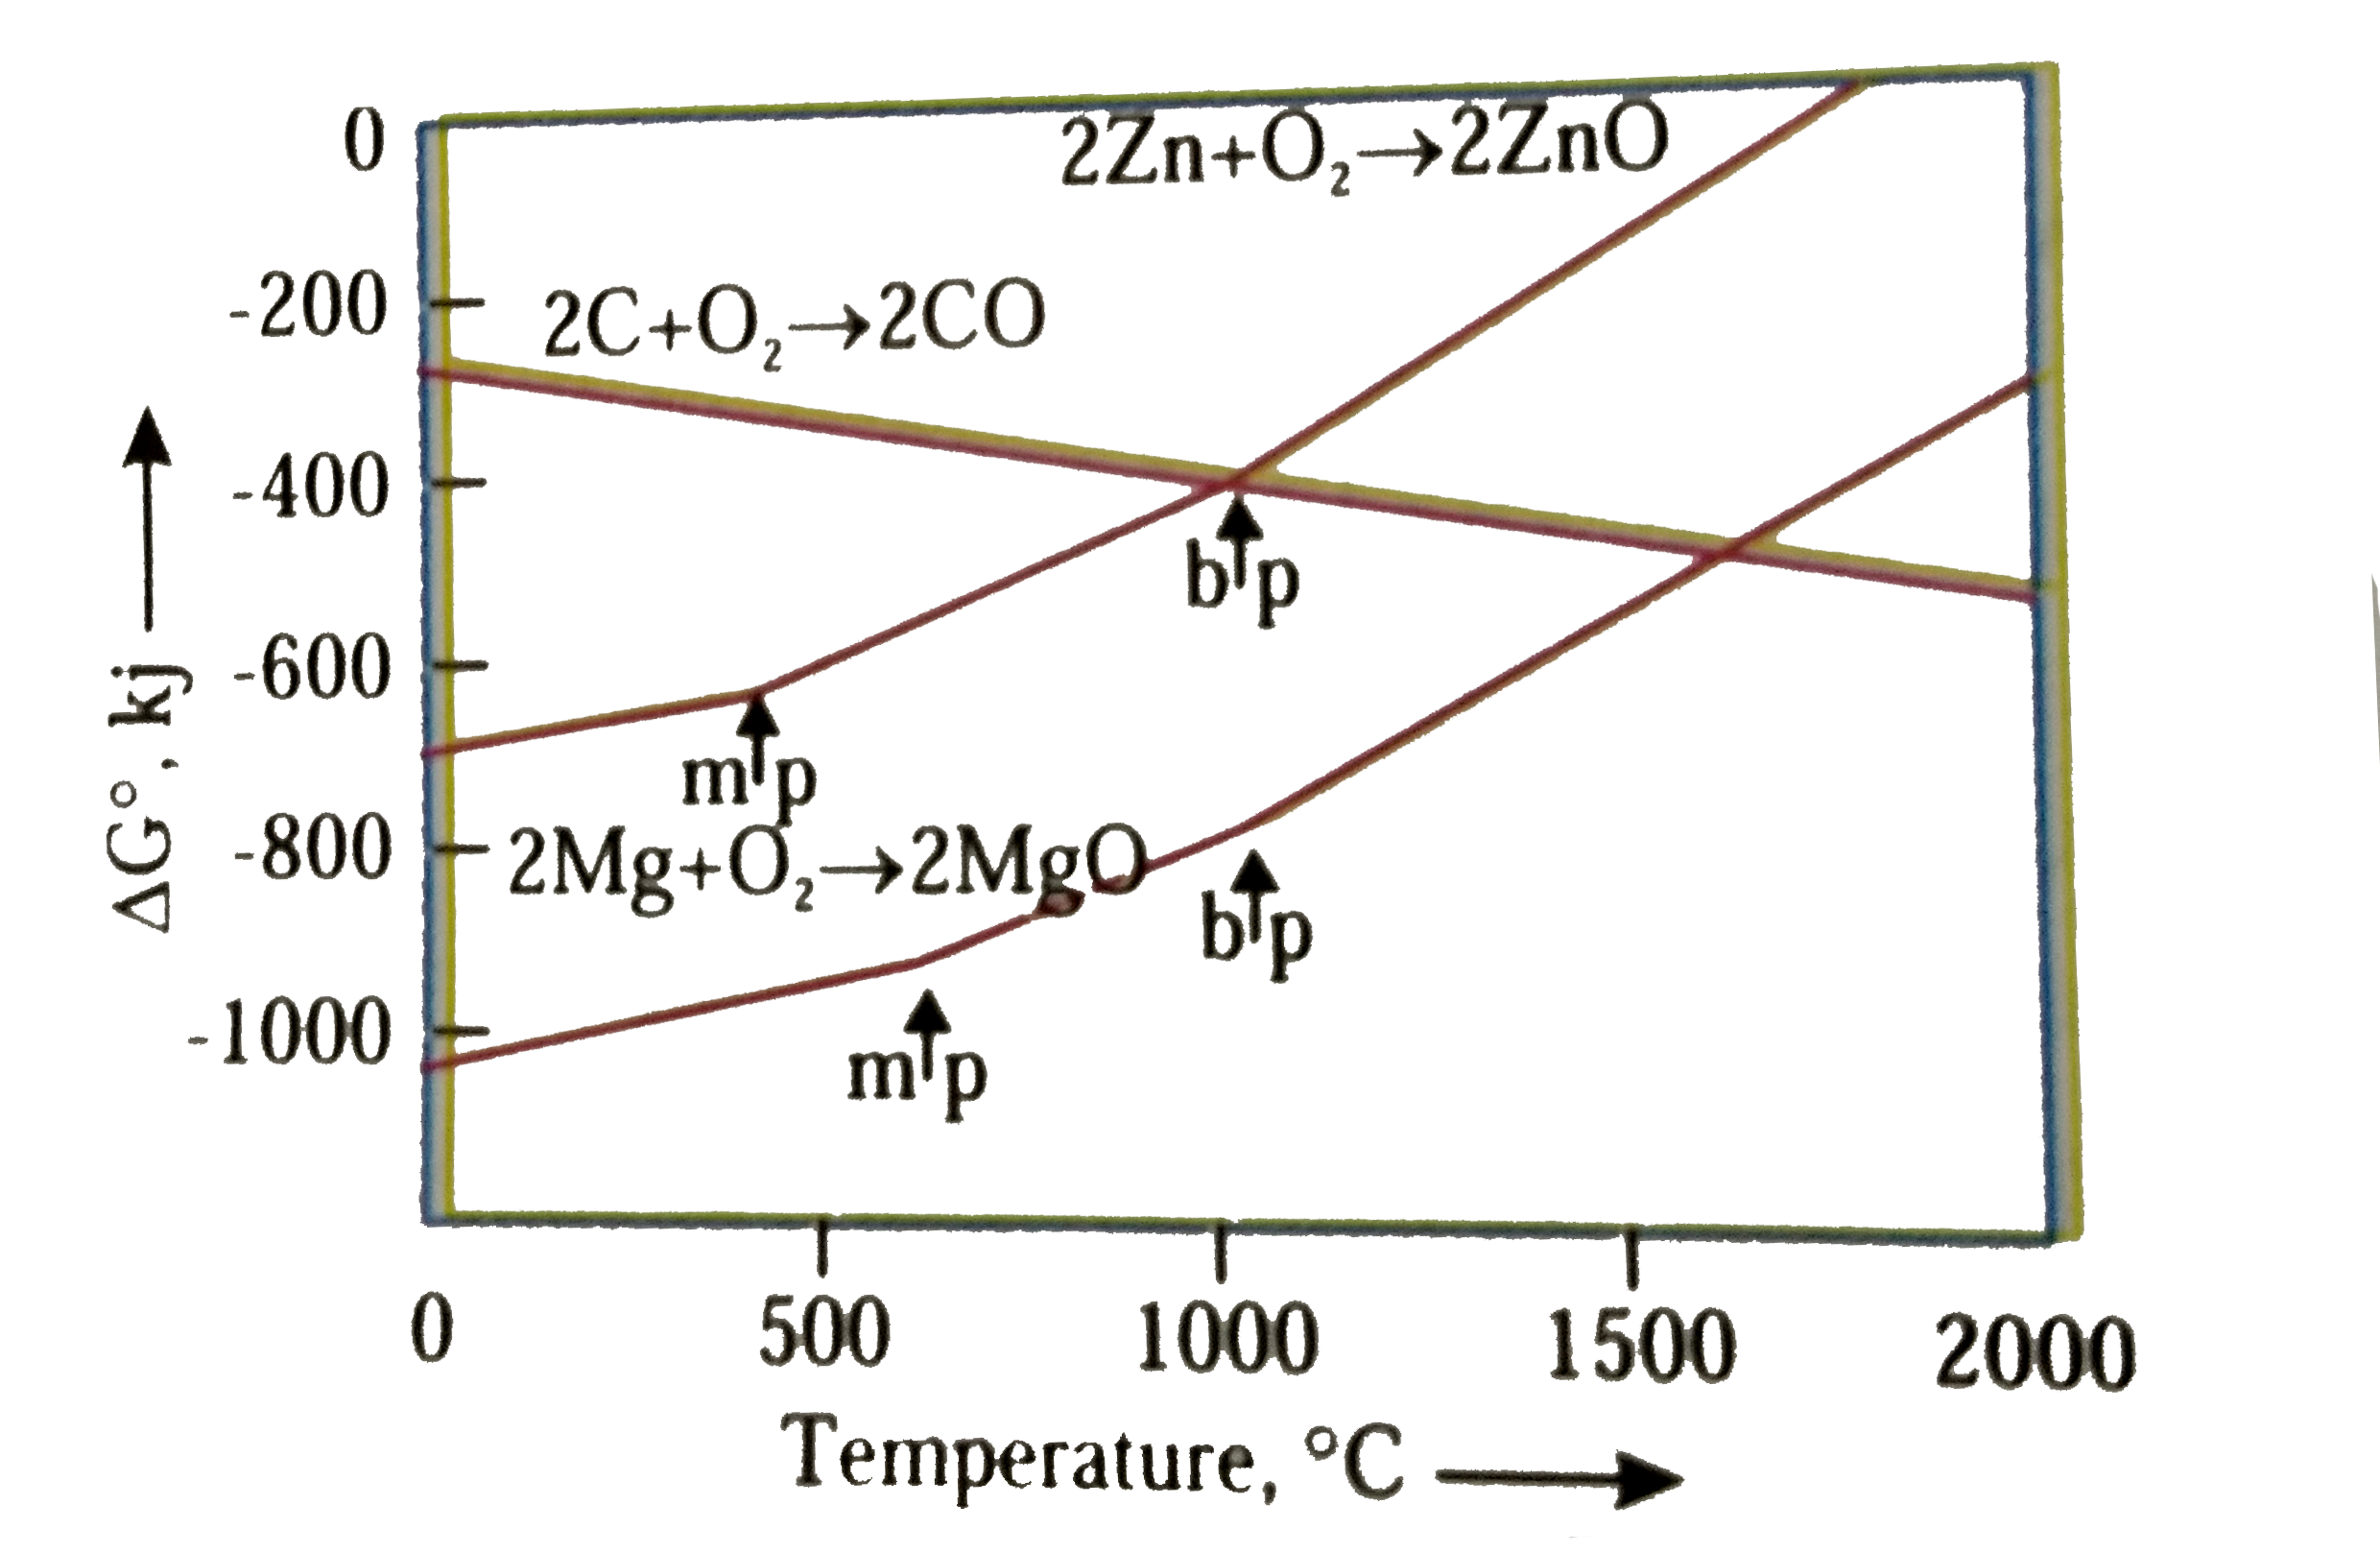 The points noted by arrows are melting and boiling points of the metal zinc and magnasium. Delta G^(0) as a function of temperature for some reaction of extractive metallurgy.   At 1000^(@)C, which reaction is spontaneous to a maximum extent